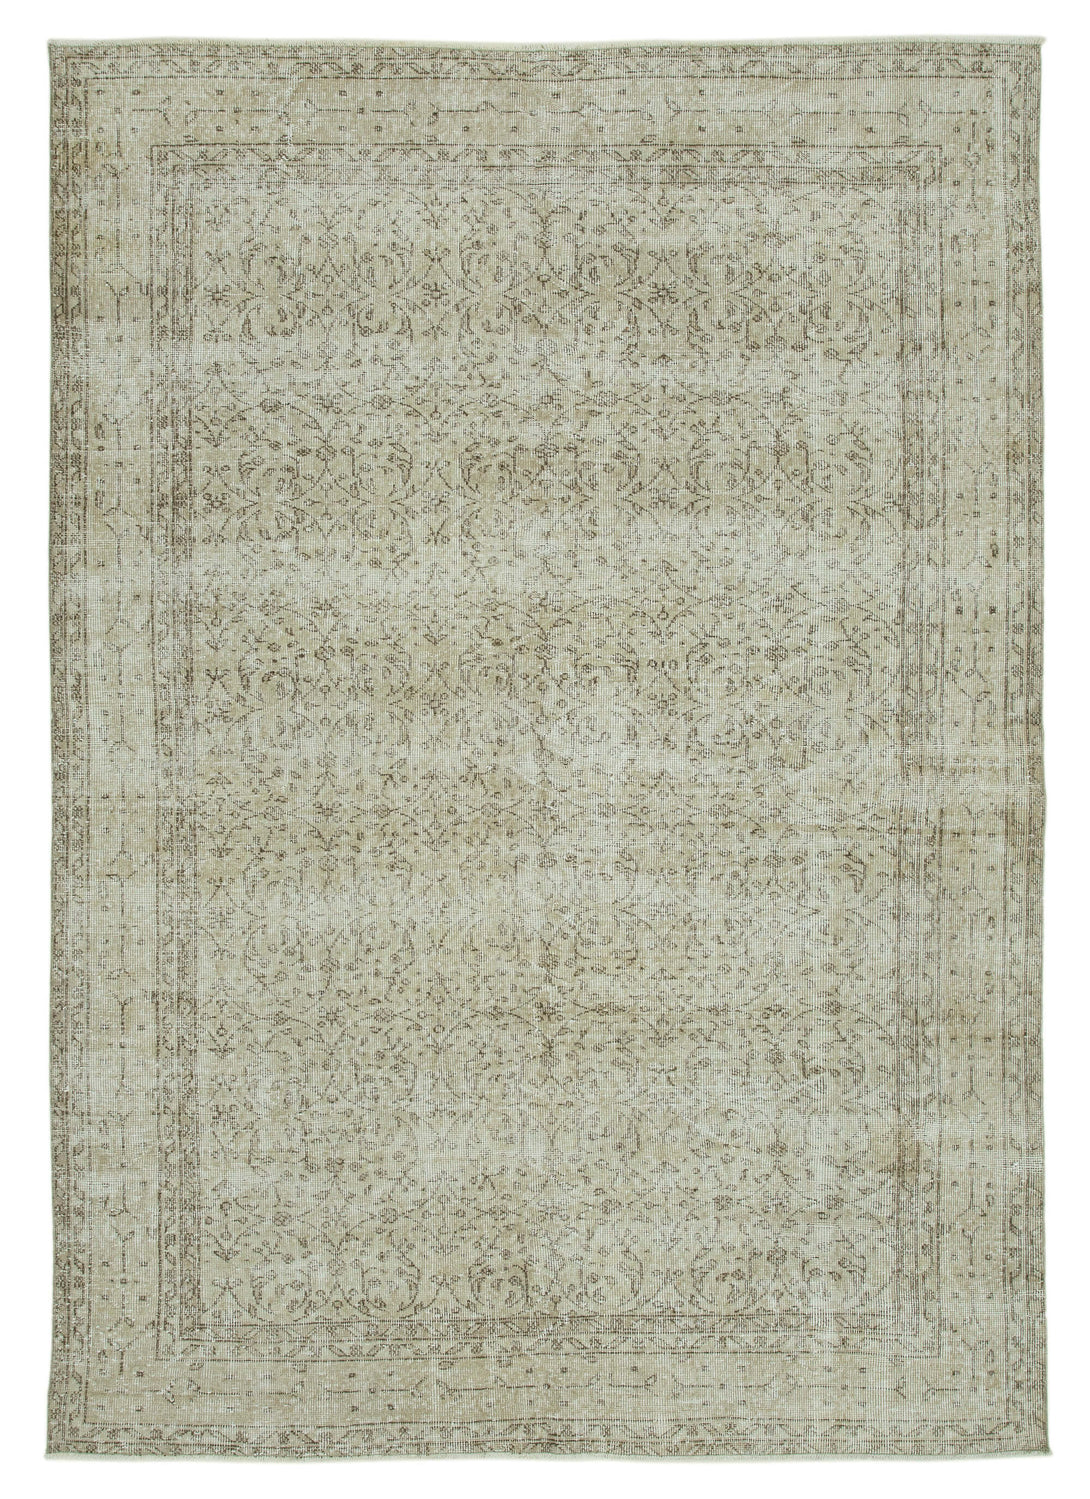 Handmade White Wash Area Rug > Design# OL-AC-36618 > Size: 6'-10" x 9'-9", Carpet Culture Rugs, Handmade Rugs, NYC Rugs, New Rugs, Shop Rugs, Rug Store, Outlet Rugs, SoHo Rugs, Rugs in USA